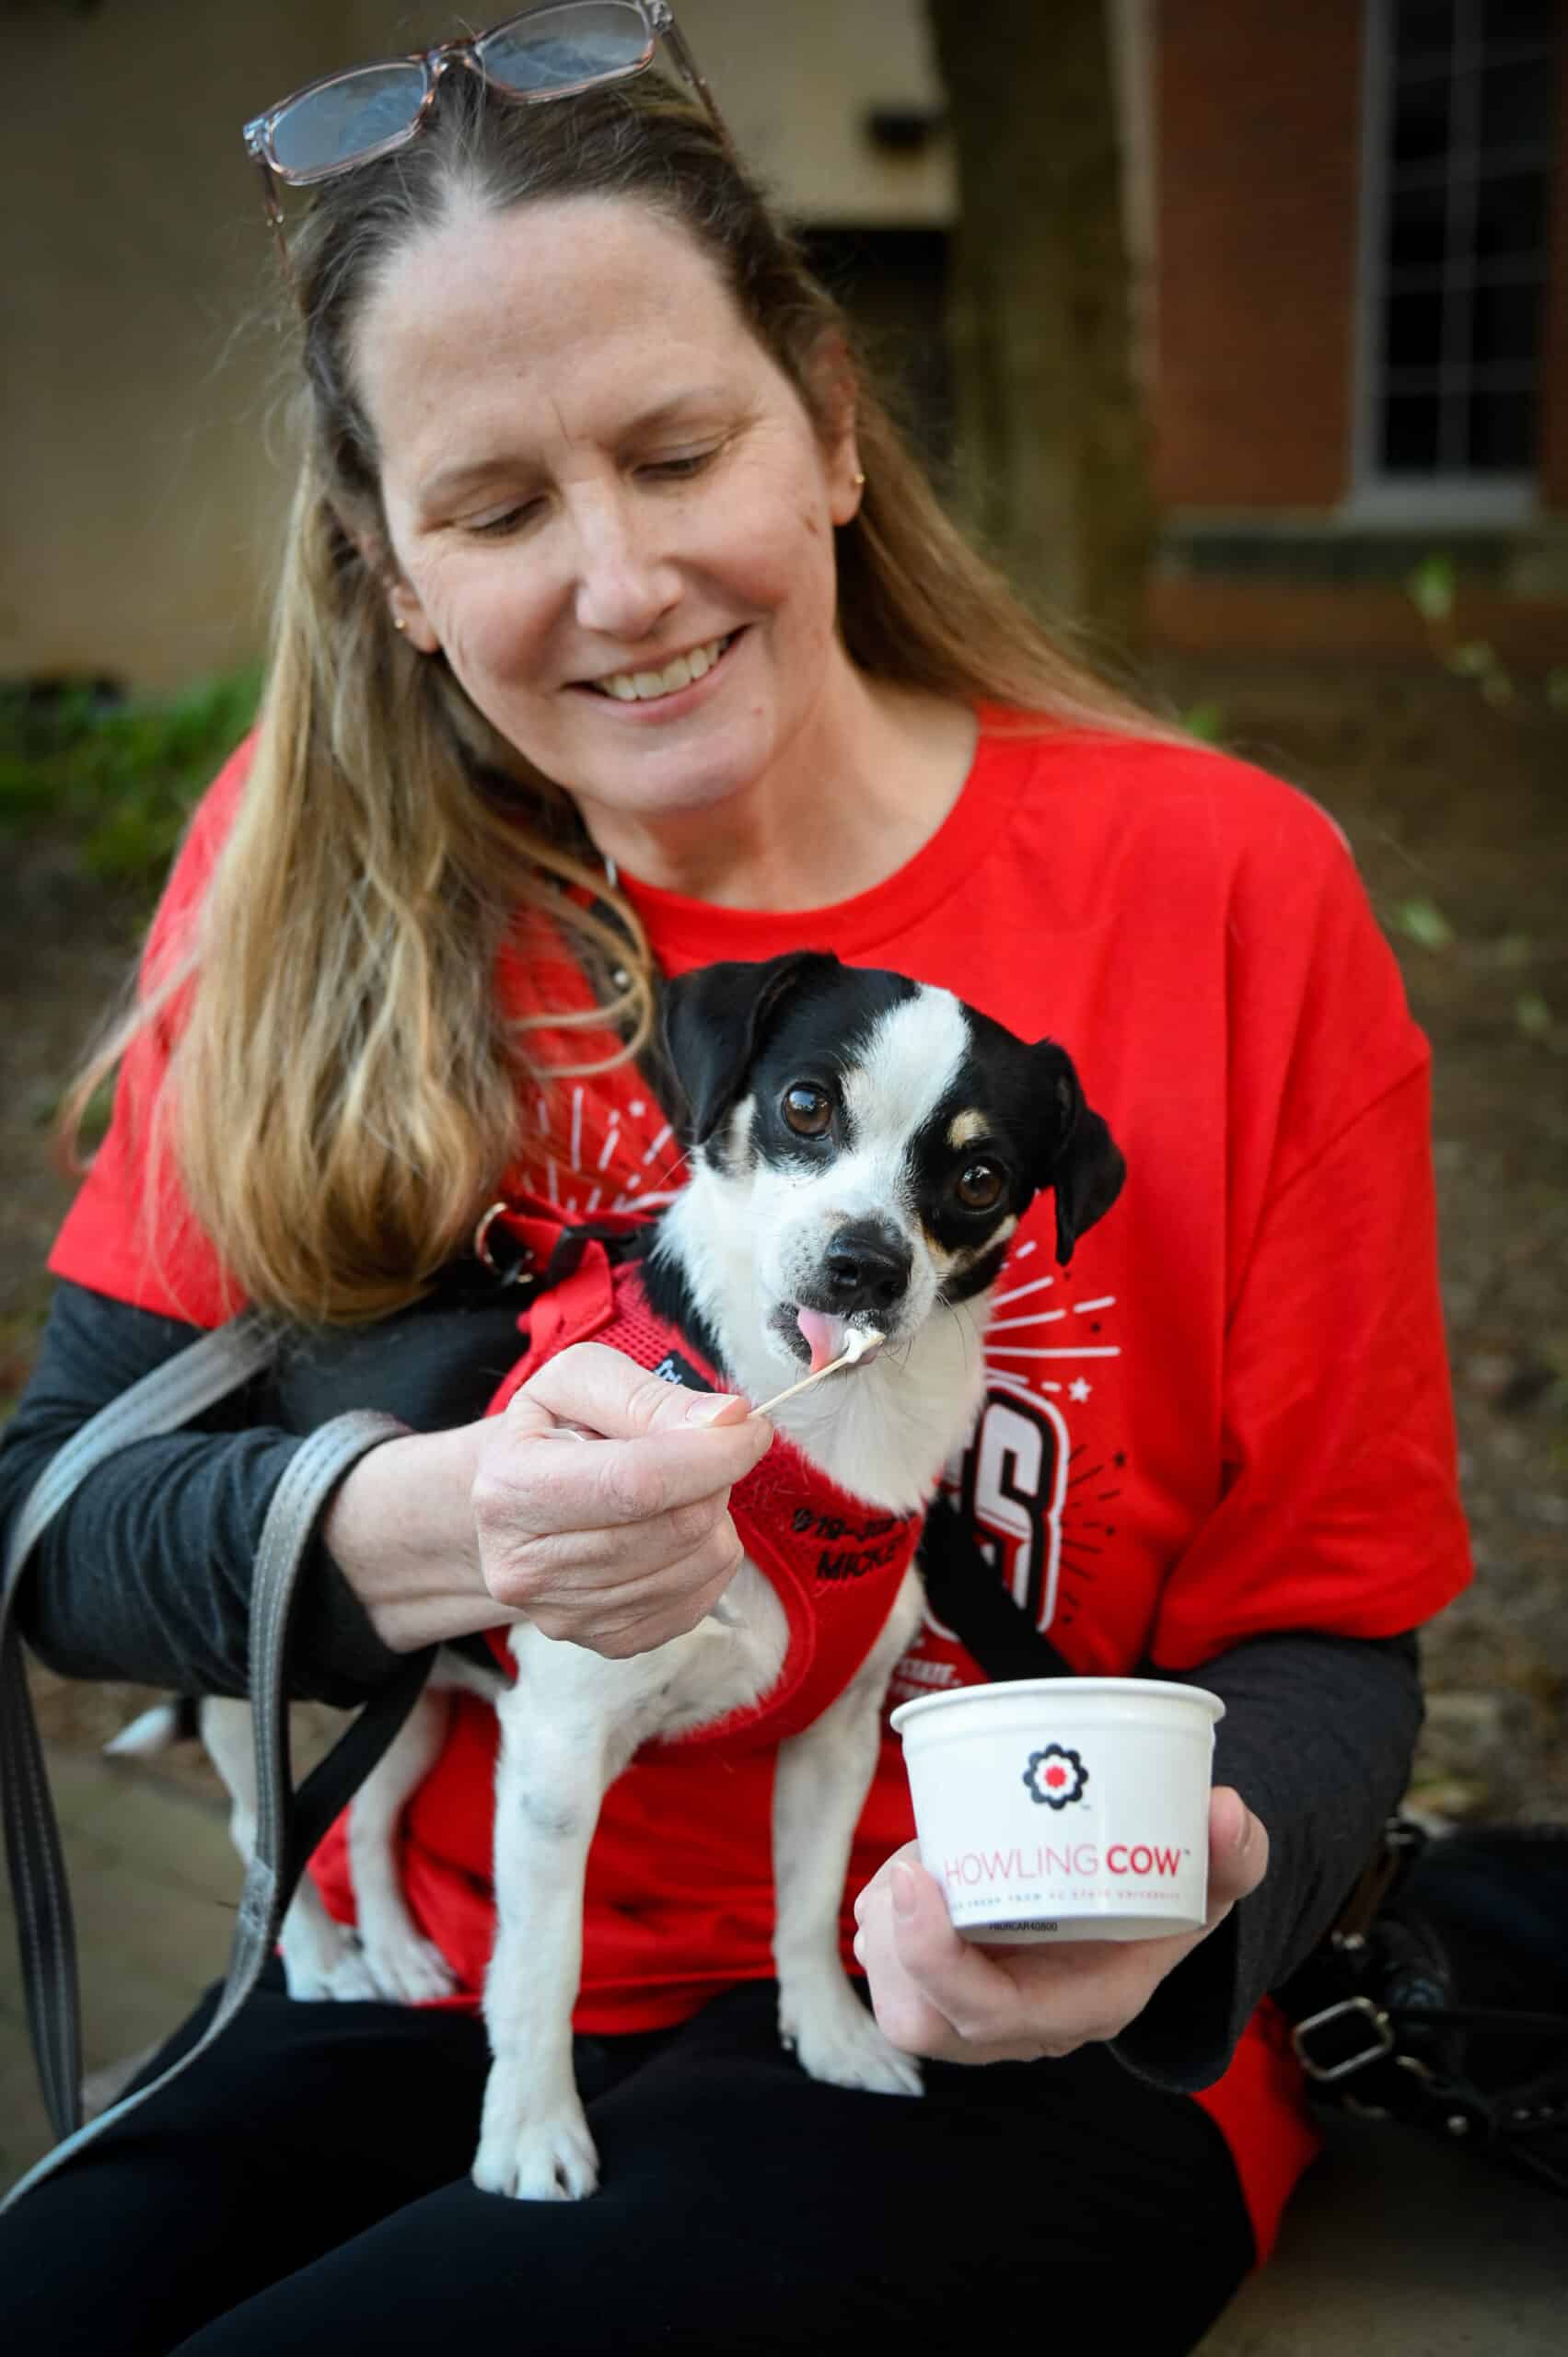 A female NC State fan feeds ice cream to her small black and white dog outside of Reynolds Coliseum